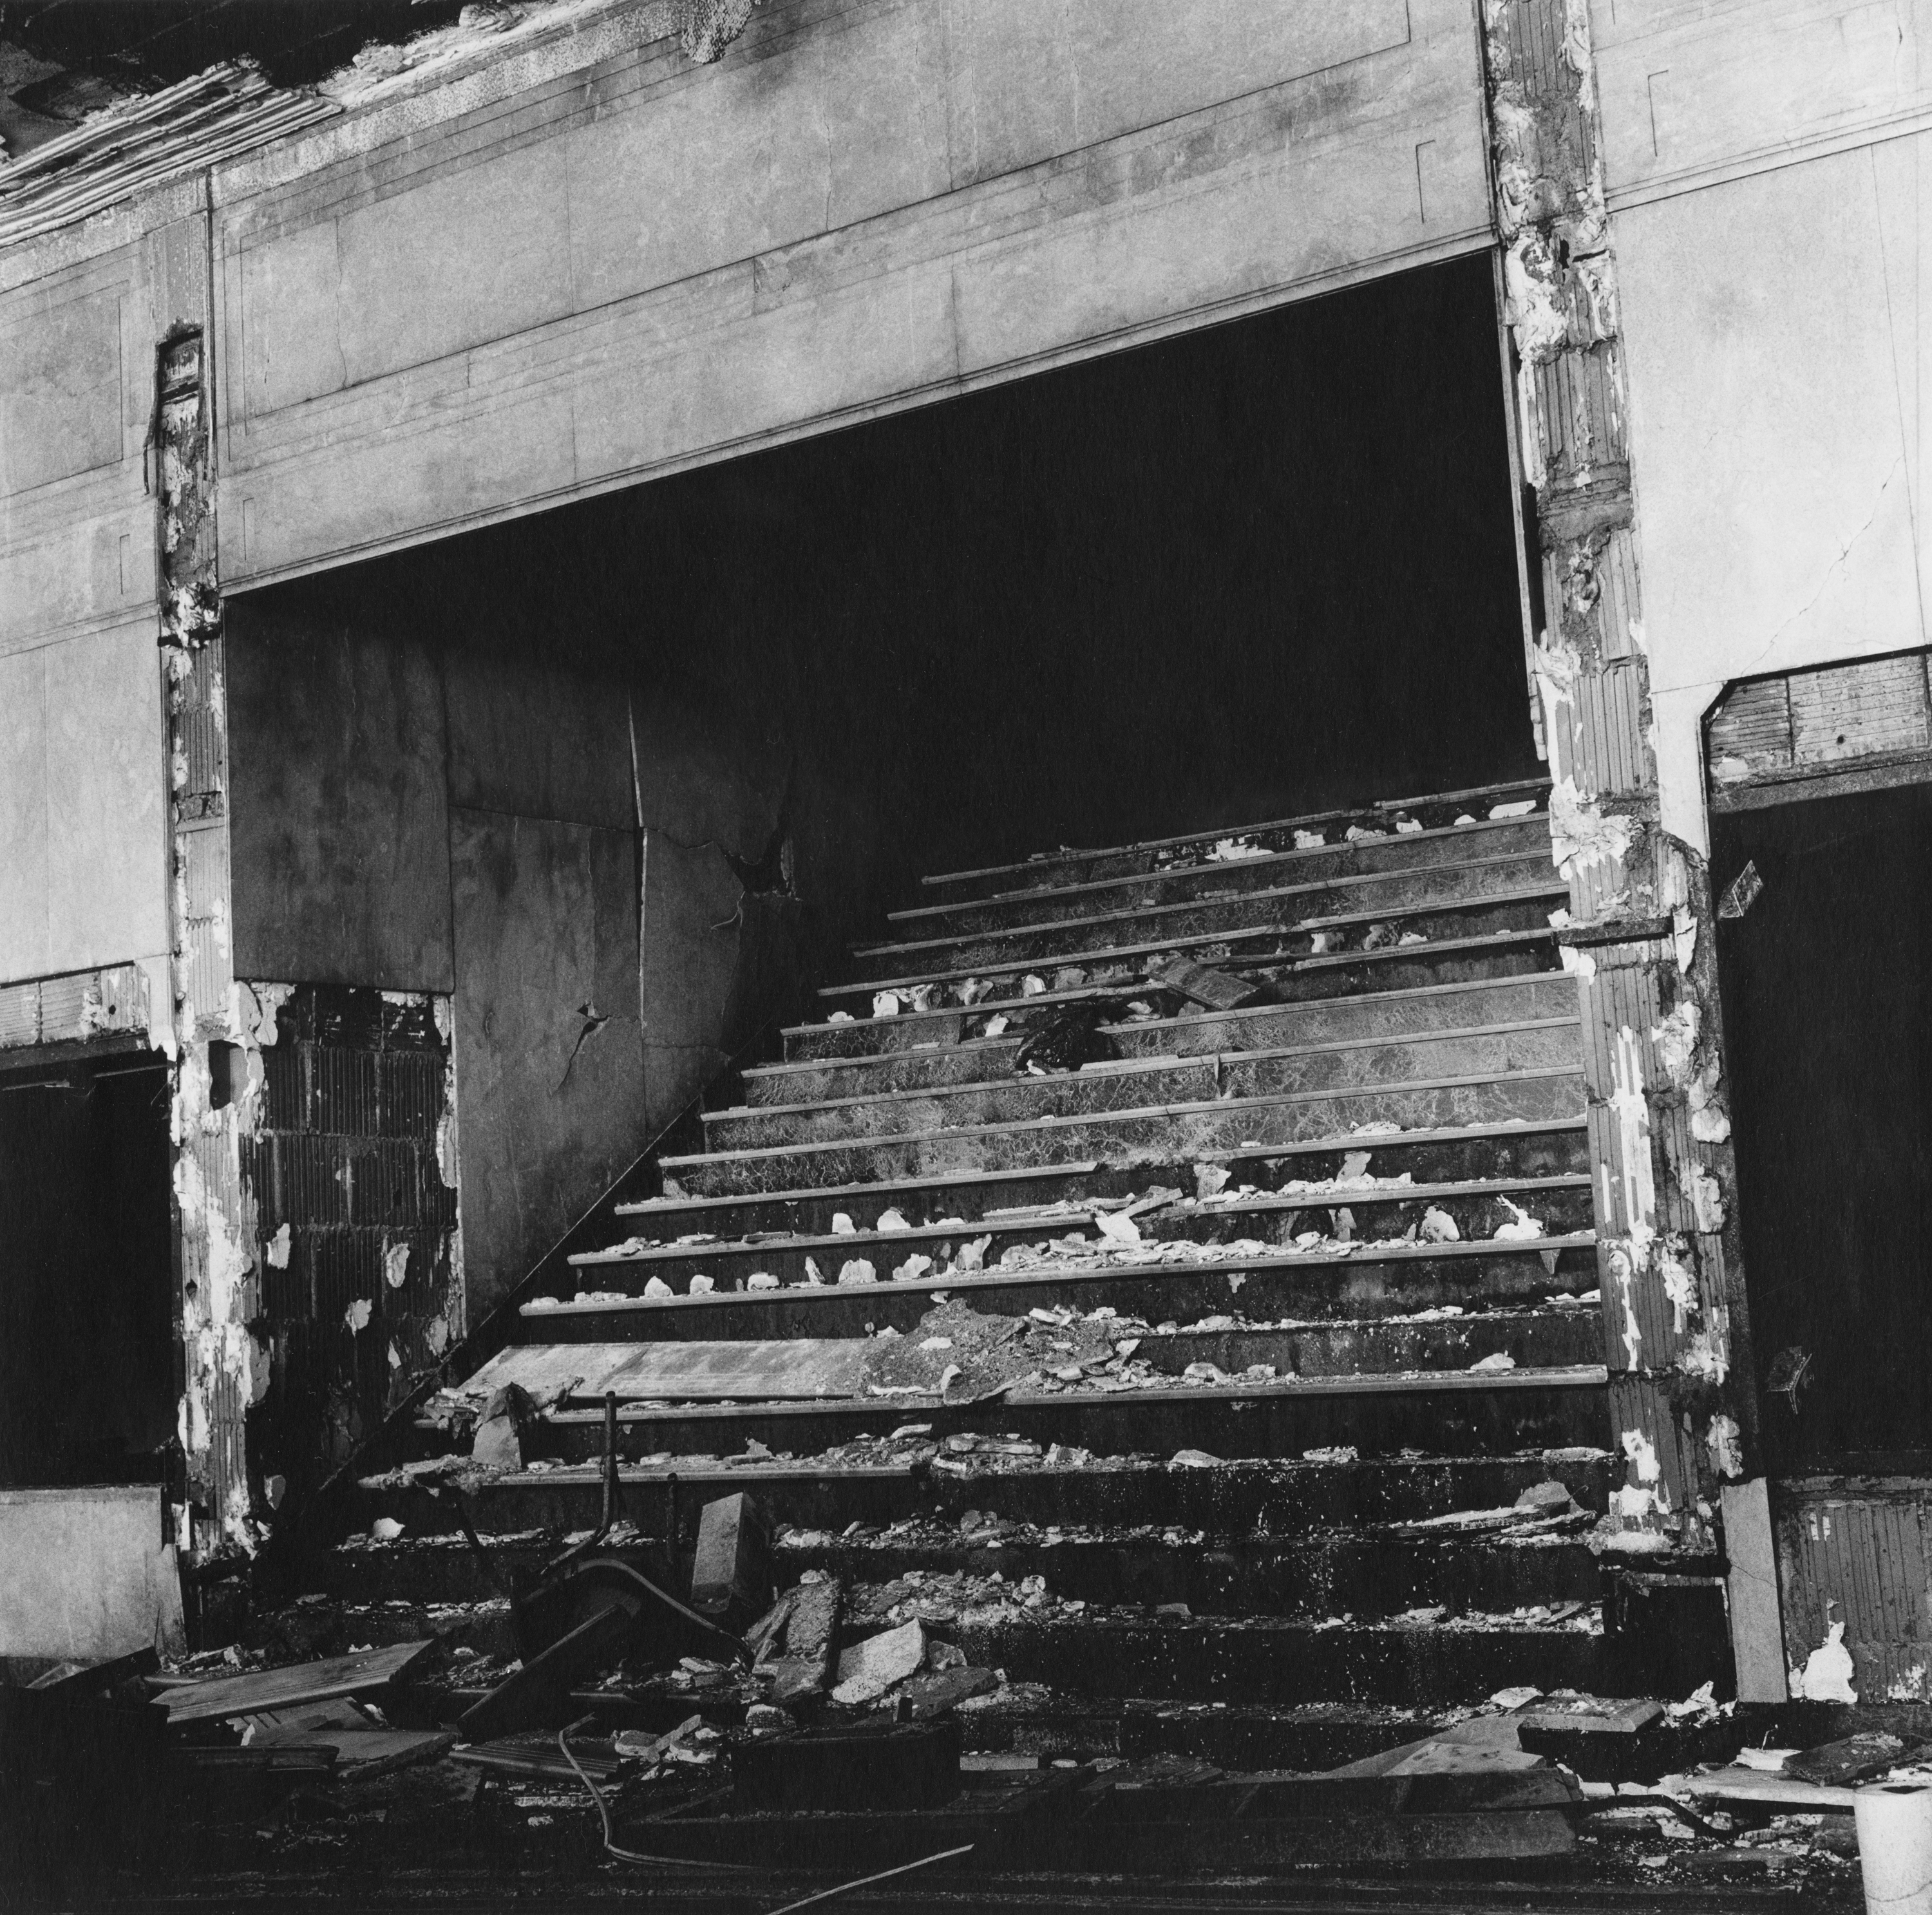 Black and white photograph of a distressed and litter ridden staircase